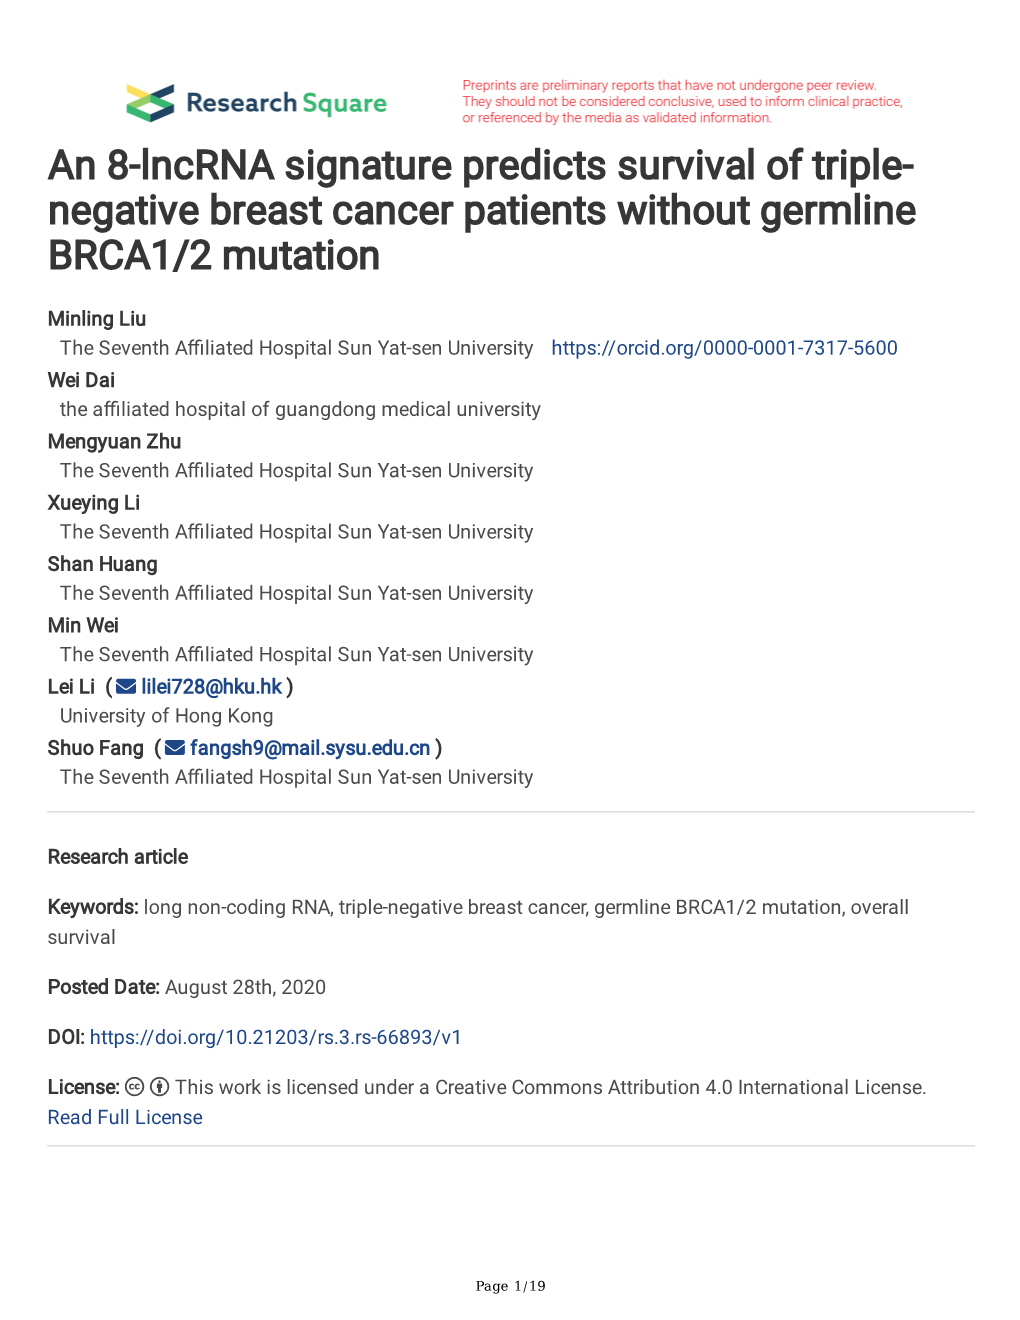 Negative Breast Cancer Patients Without Germline BRCA1/2 Mutation